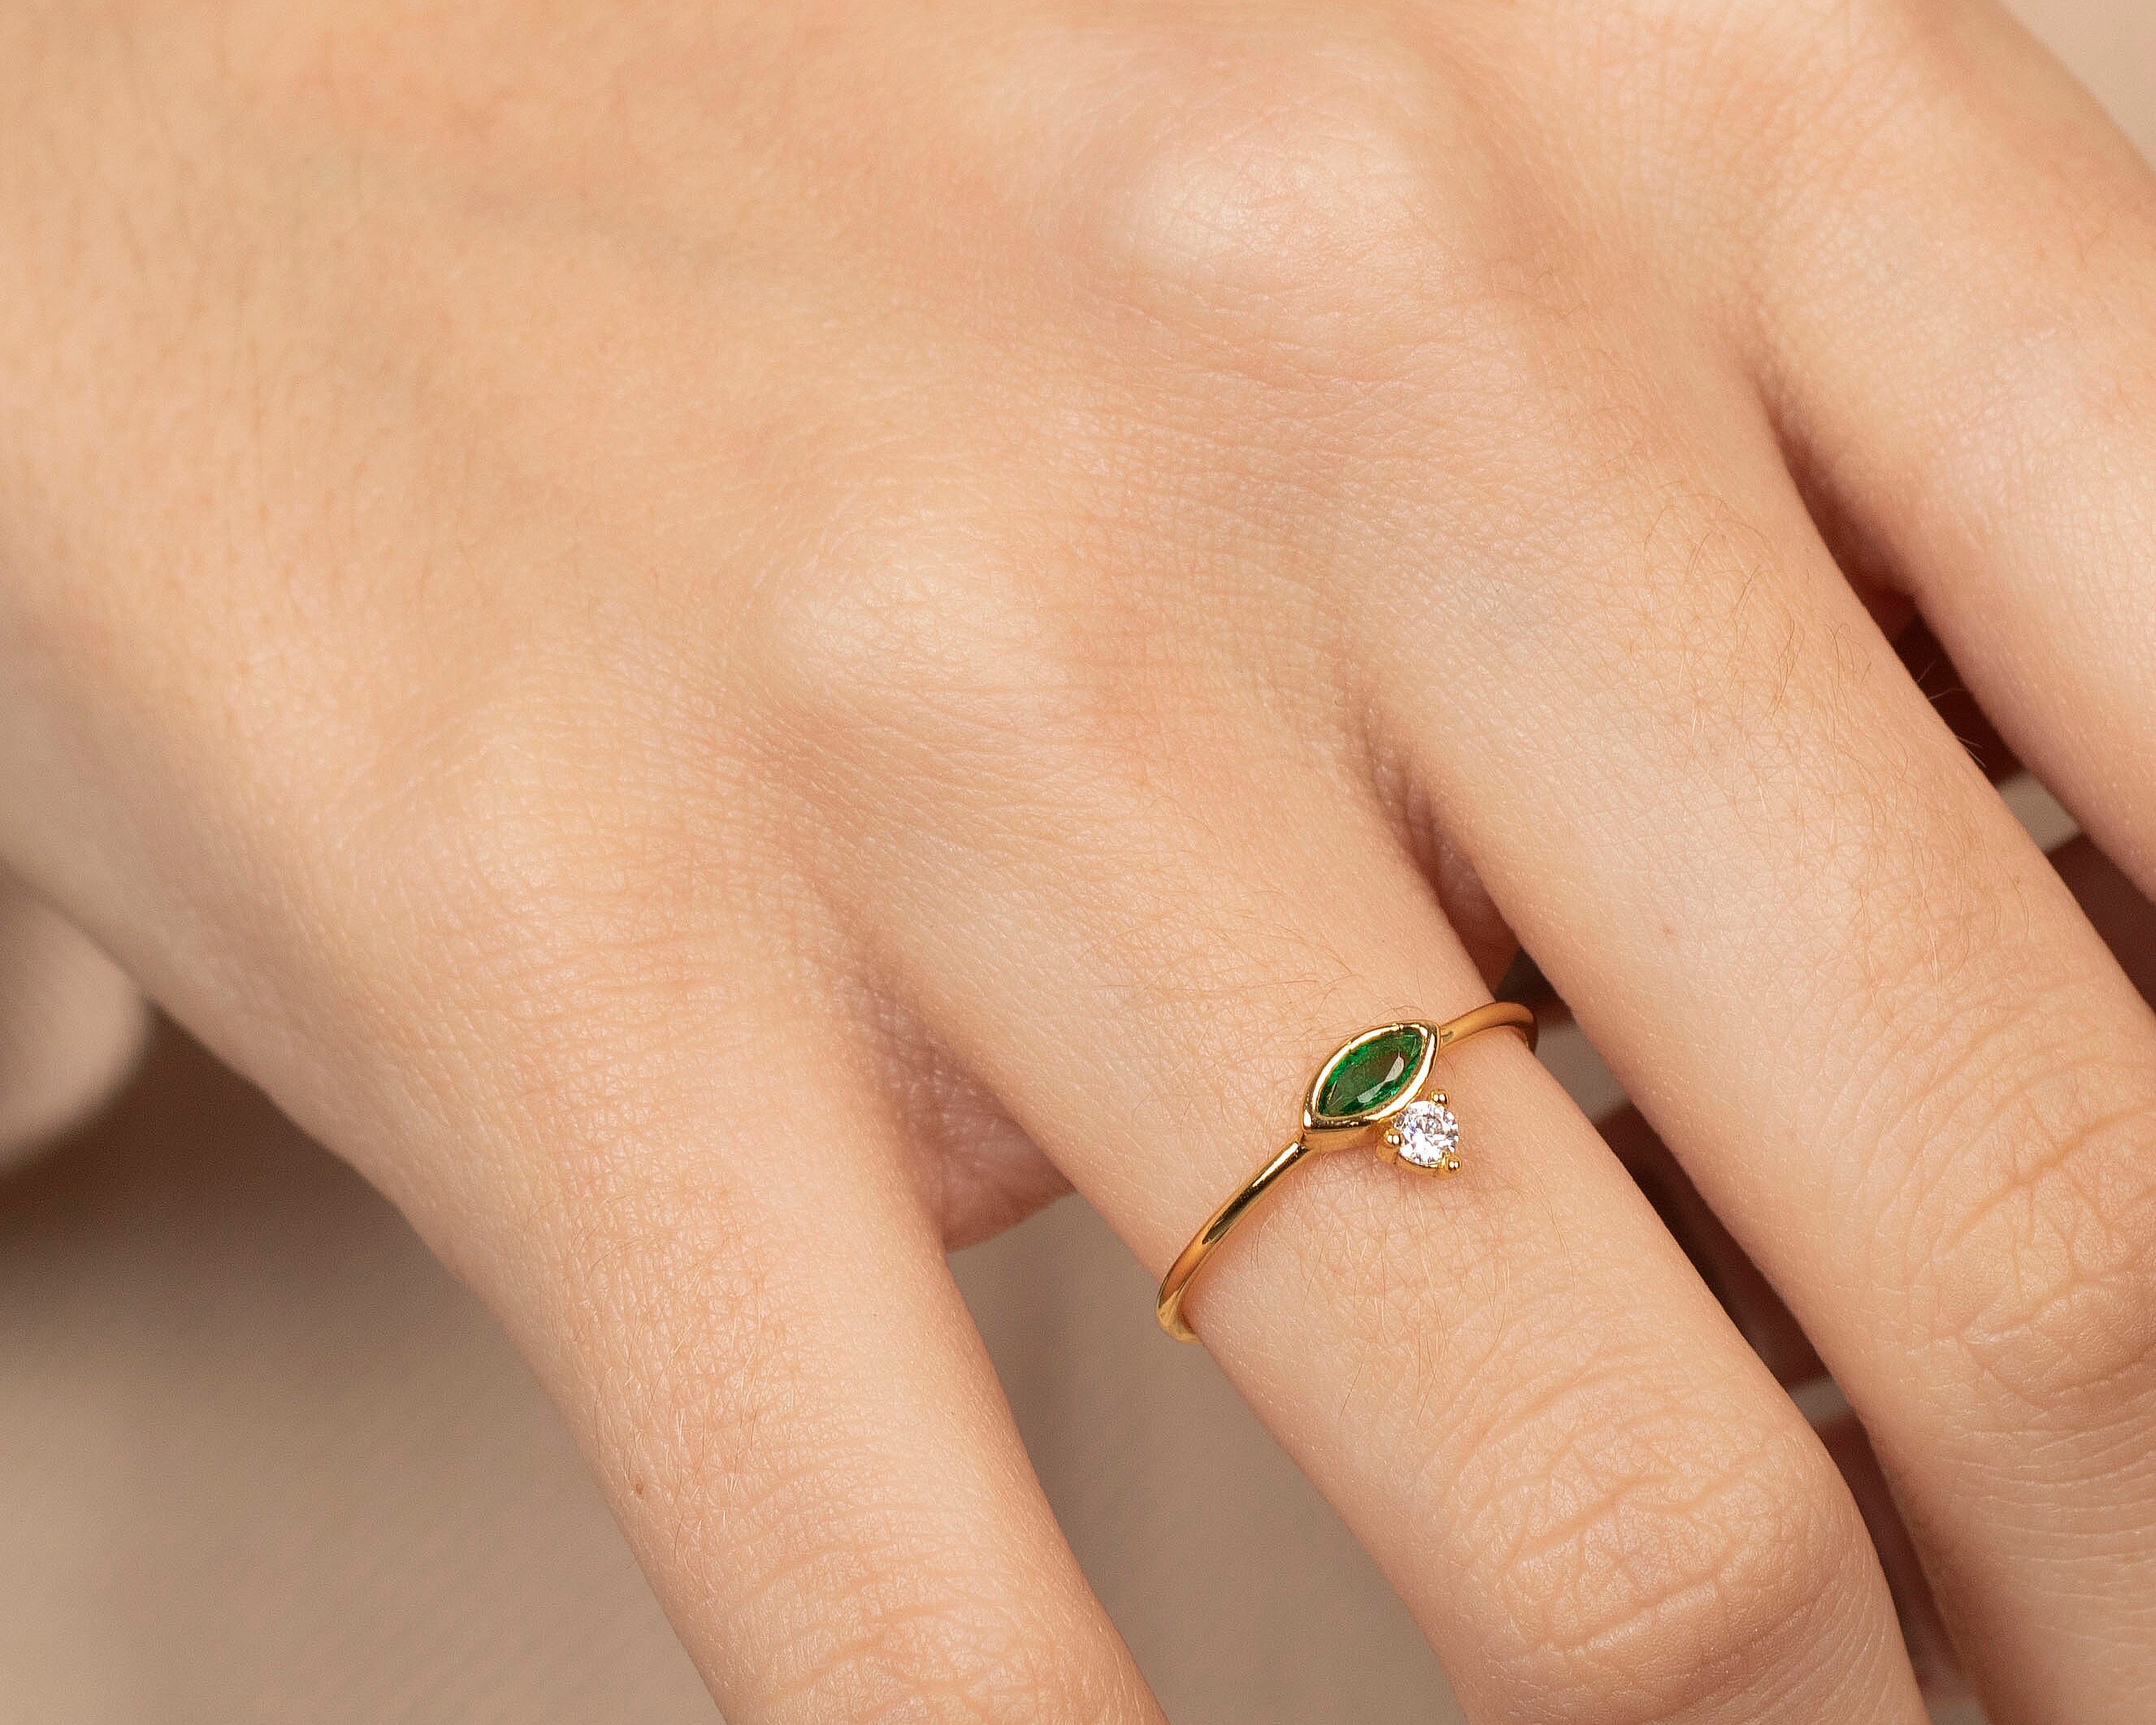 Minimalist Emerald Engagement Ring Wedding Ring Green Gemstone Daily Ring For Women Solid Gold Ring Gift For Women S925 Silver Ring